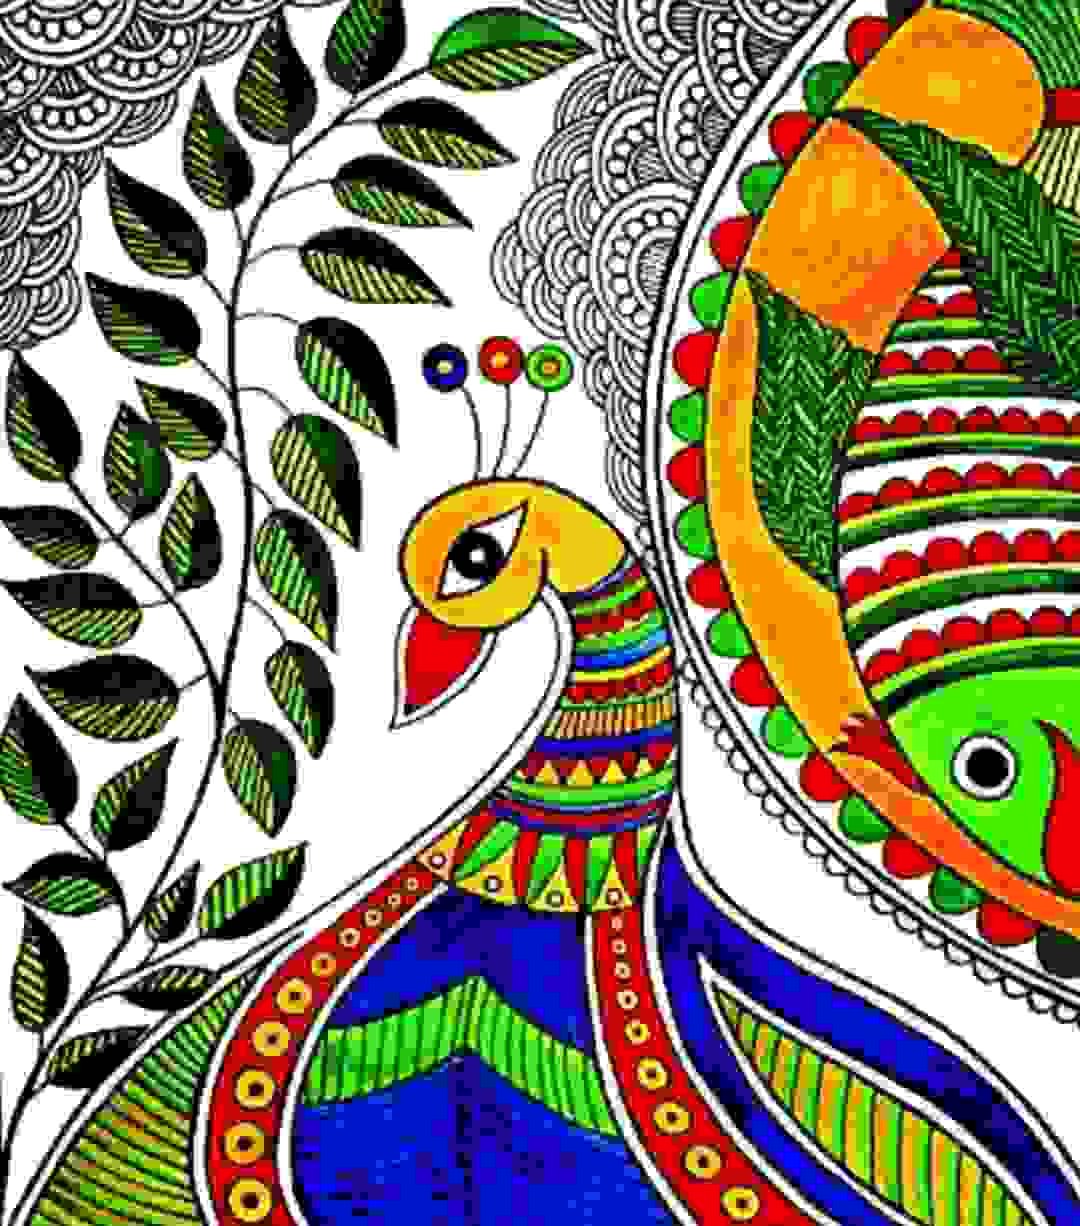 Painting Of Madhubani Painting In Paintings Size A4size Sq C